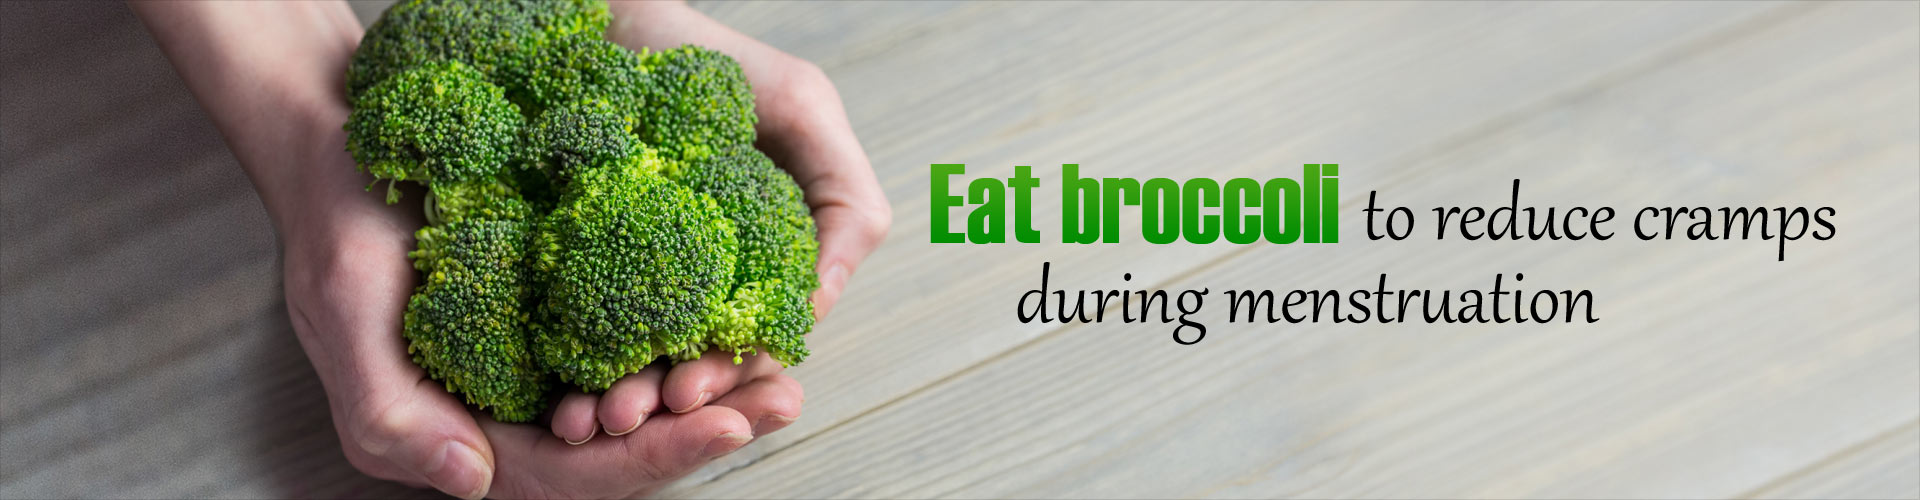 Eat broccoli to reduce cramps during menstruation